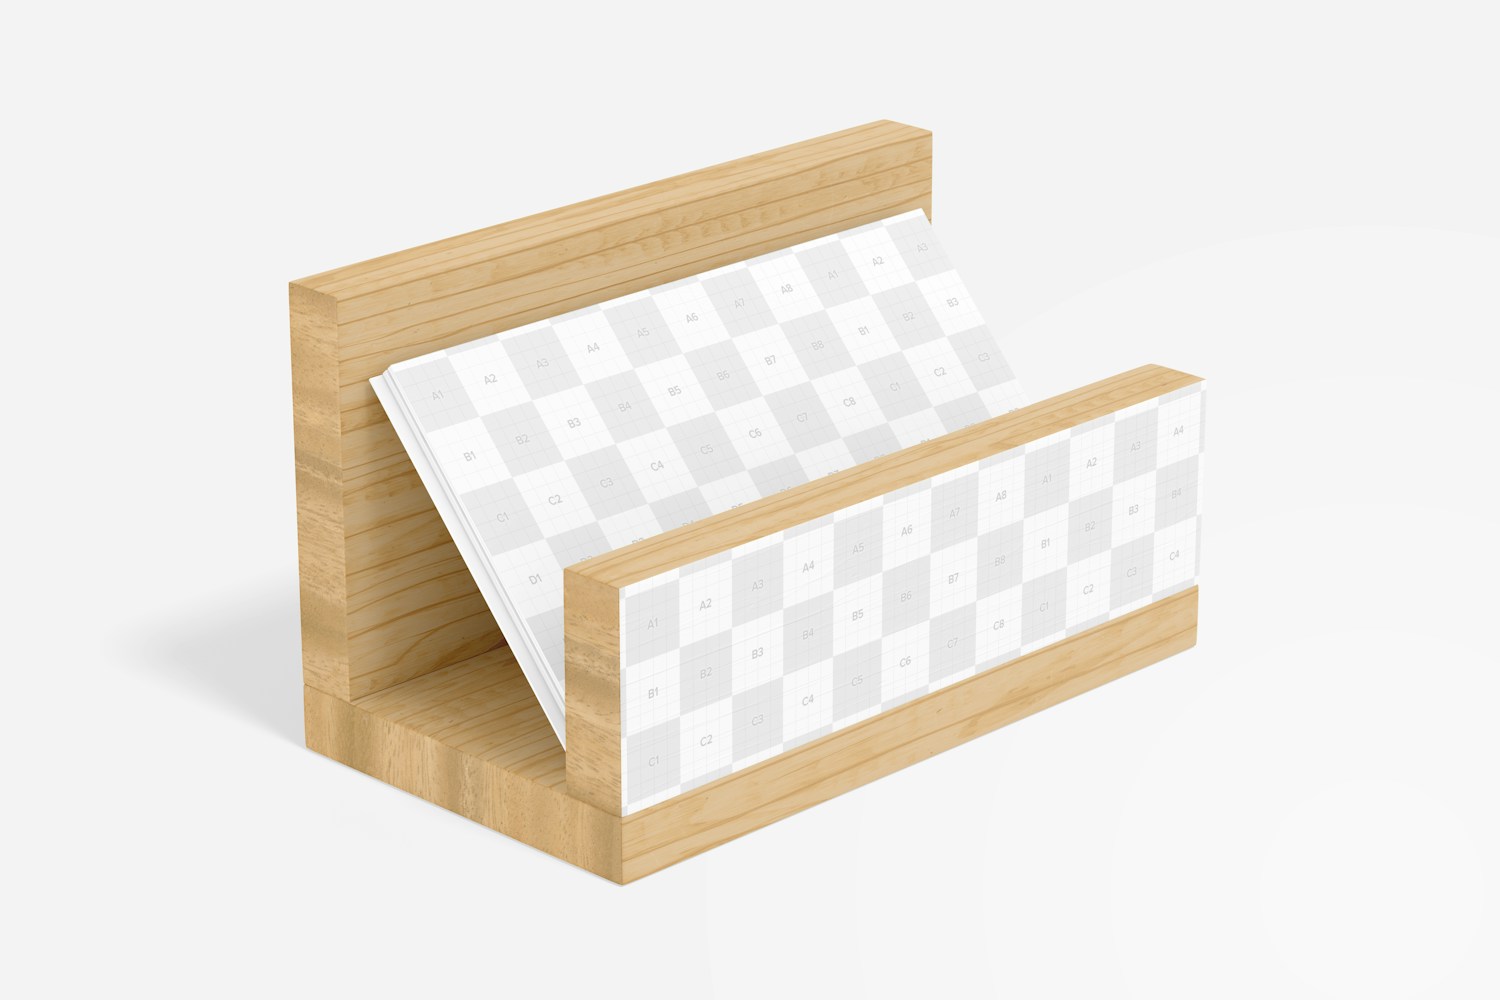 Bamboo Business Card Holder Mockup, Side View